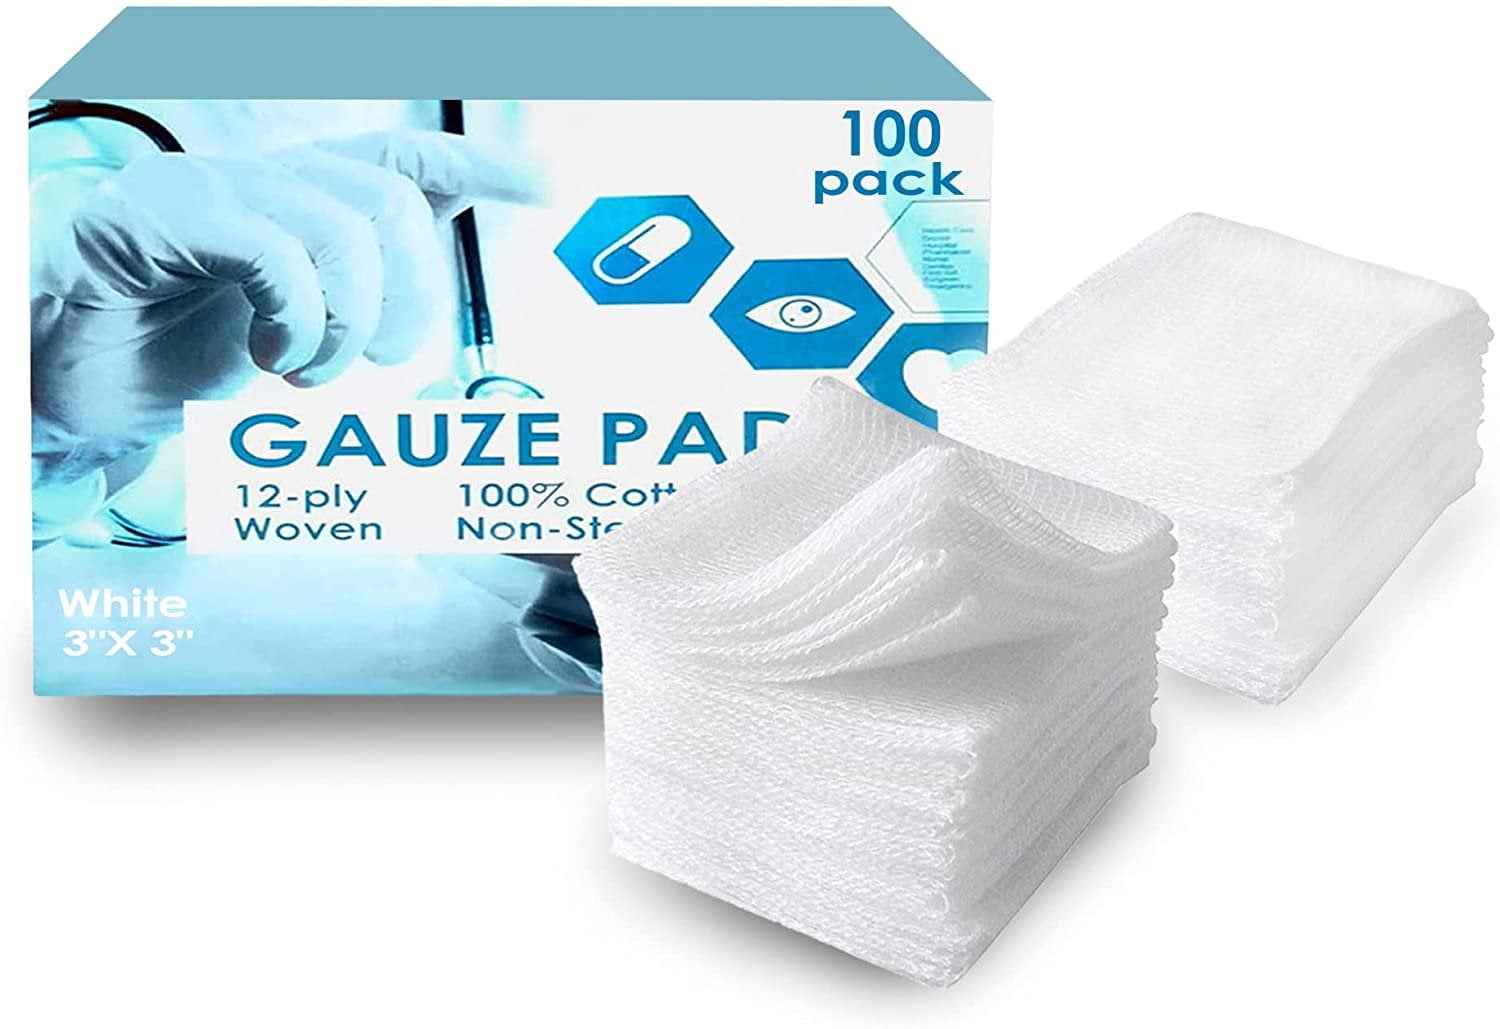 EZGOODZ Cotton Gauze Pads Non Sterile 3 x 3 Inch. 2400 Pack of White 12-Ply  Non Stick Gauze Pads Non Sterile. Disposable Absorbent Medical Gauze  Squares. Breathable and Soft Surgical Gauze Pad 